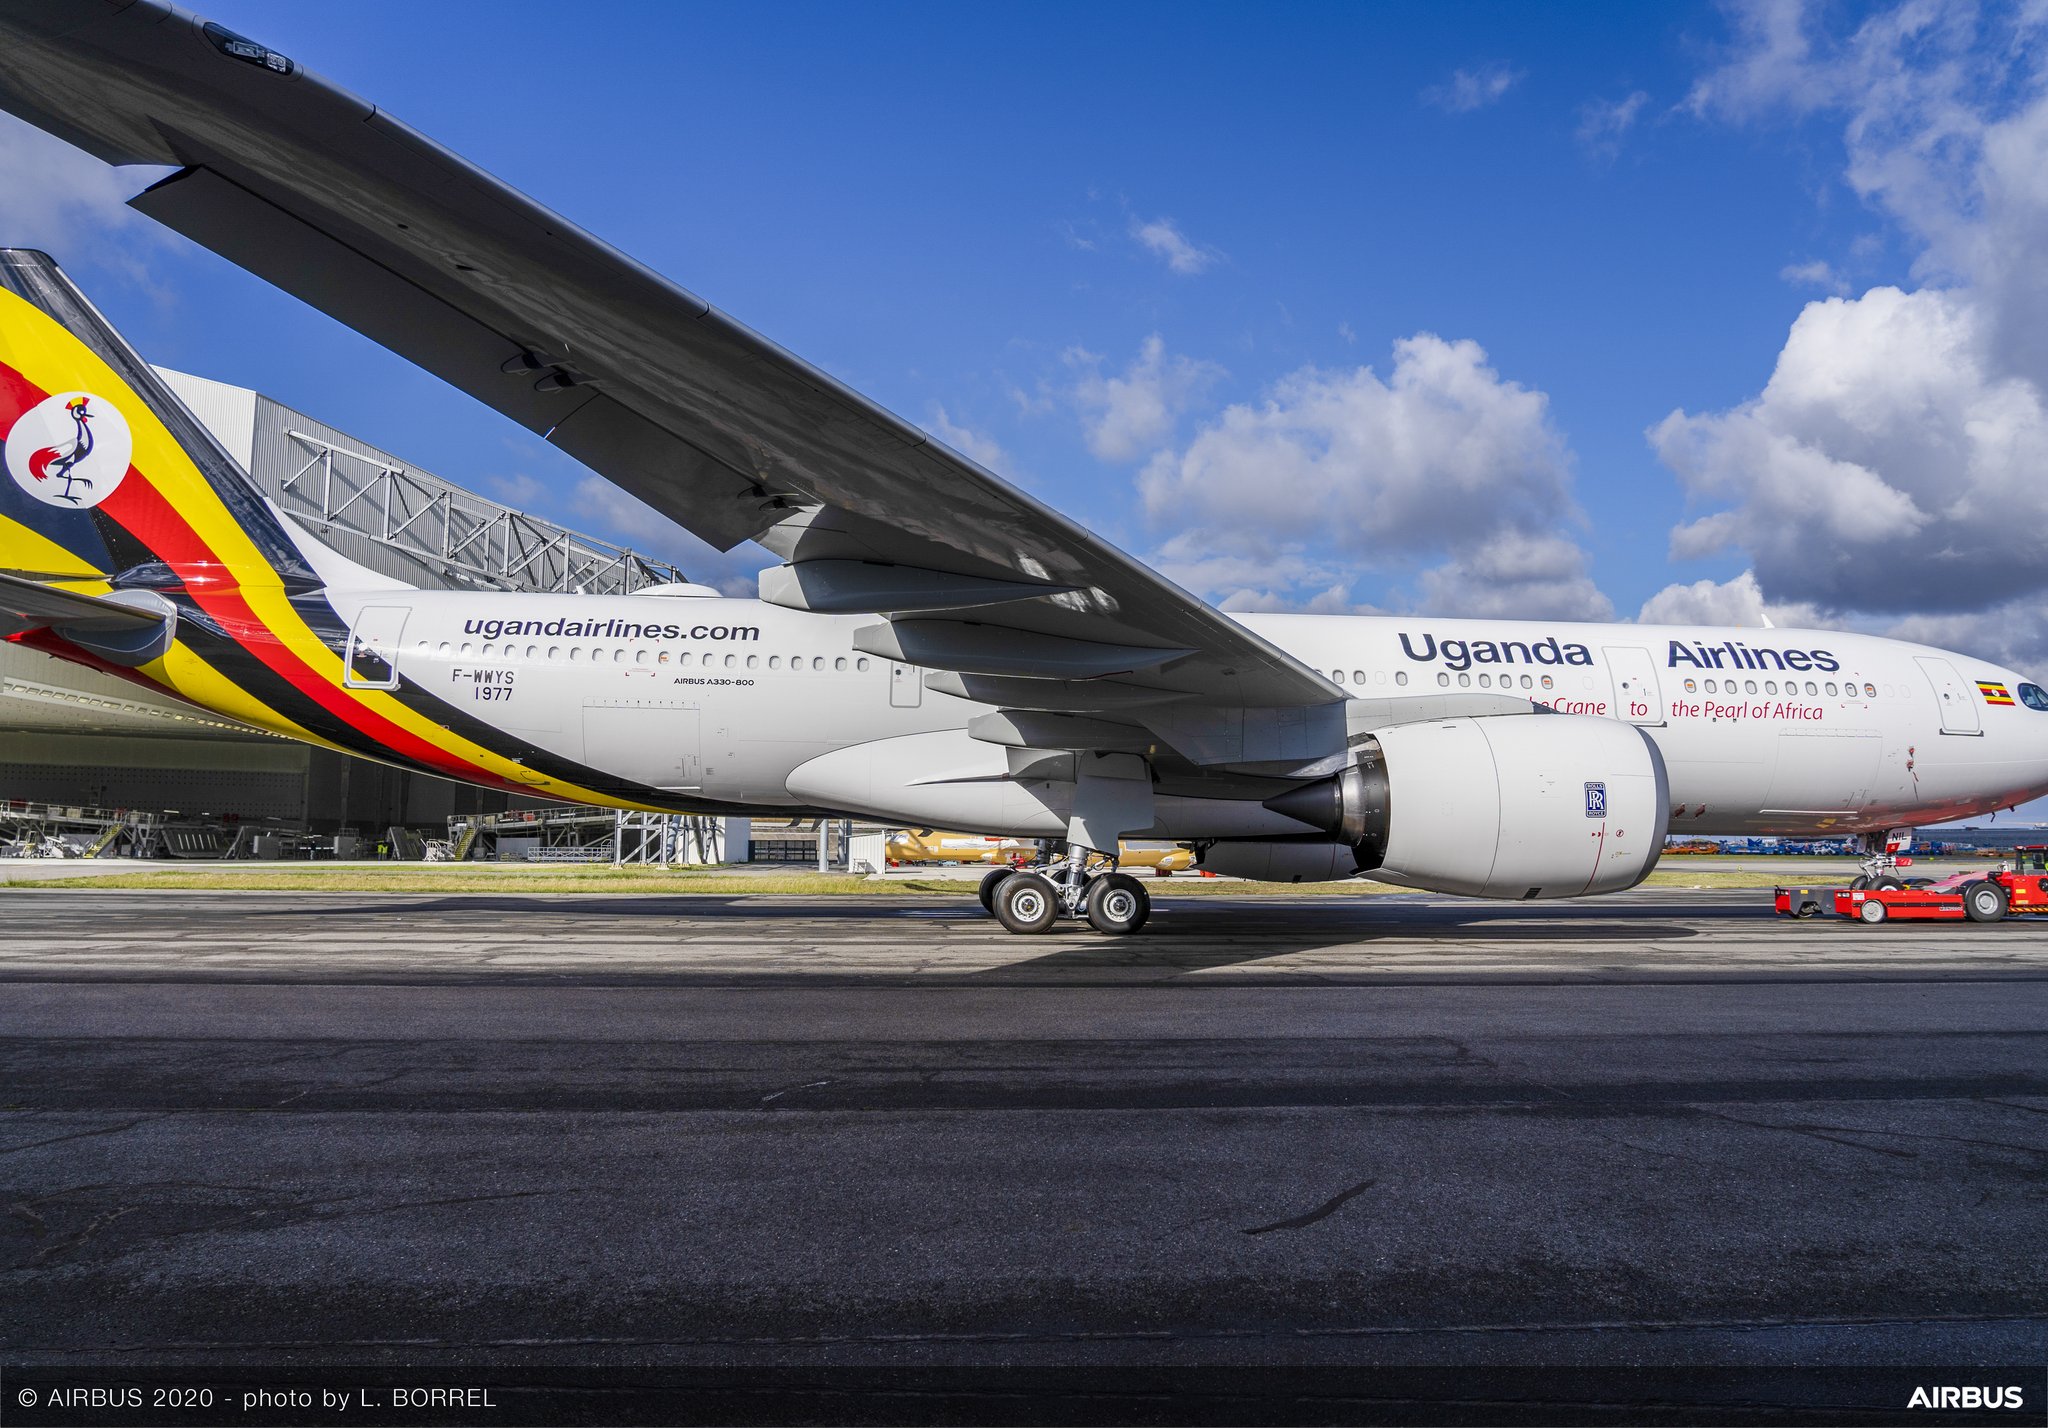 Read more about the article Uganda Airlines Announces long Haul Schedules